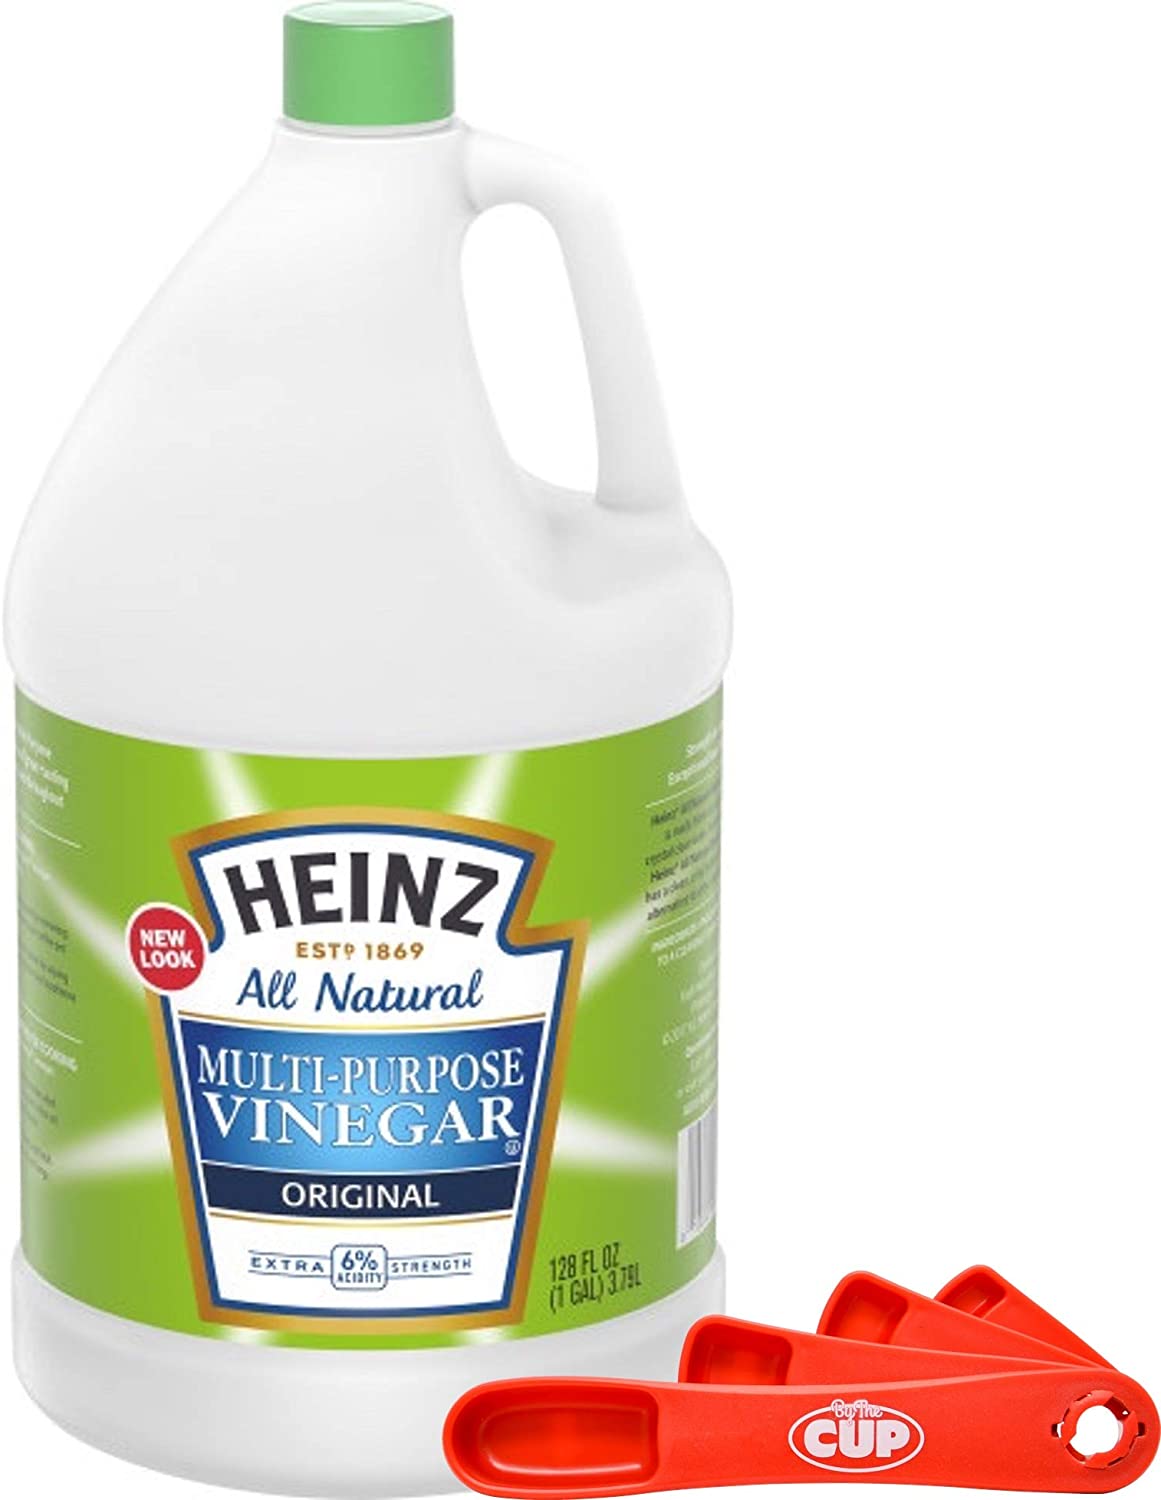 Heinz All Natural Multi-Purpose Cleaning Vinegar 1 Gallon Bottle with By The Cup Swivel Spoons